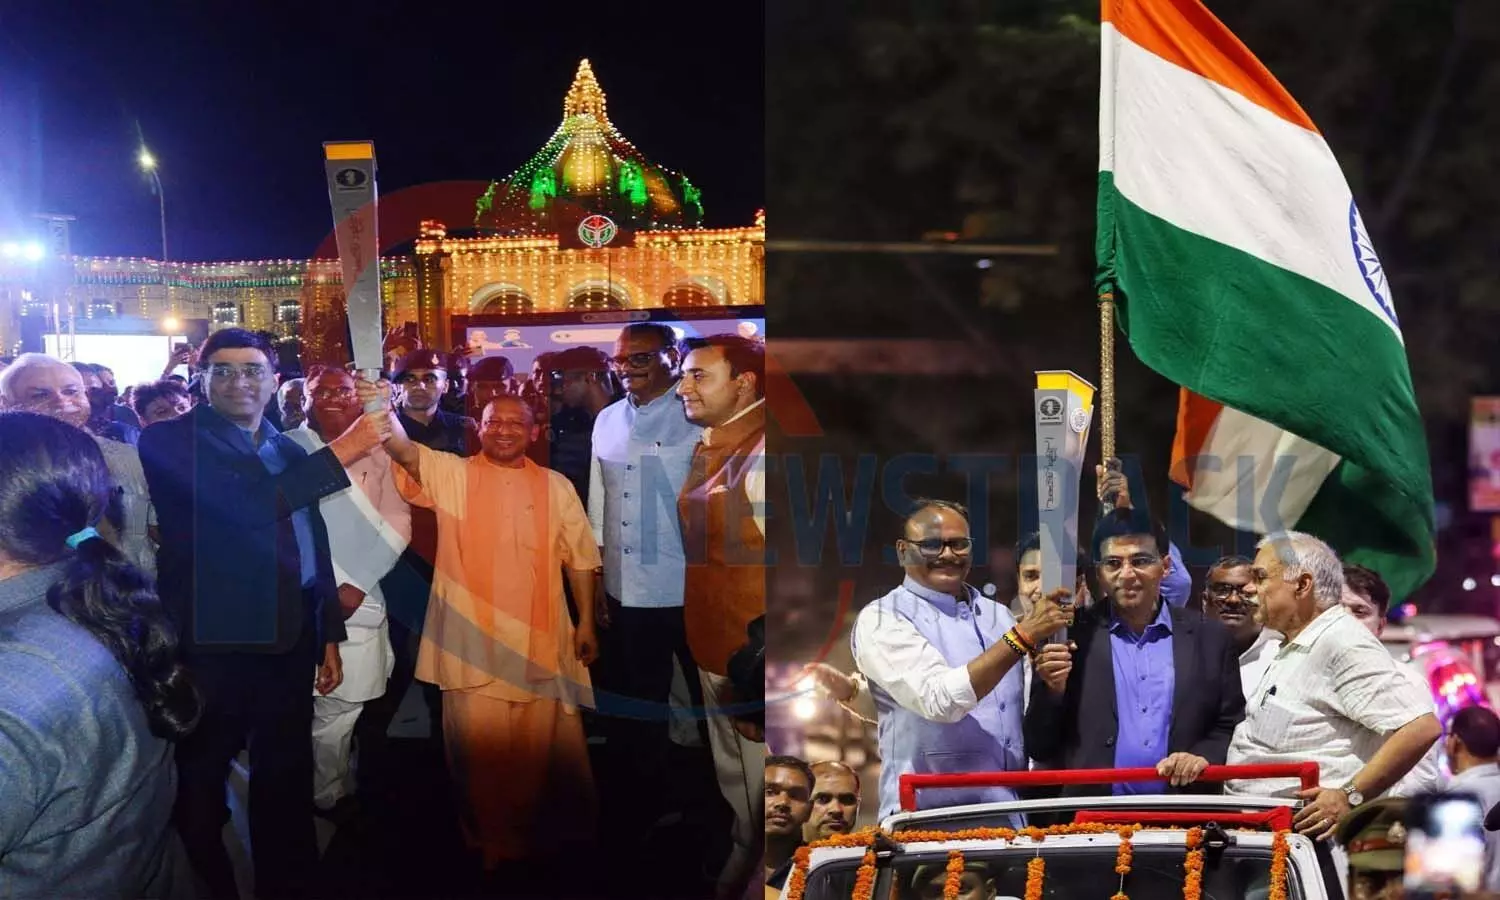 Chess Olympiad torch relay reached Lucknow, CM Yogi said - Chess was born in India